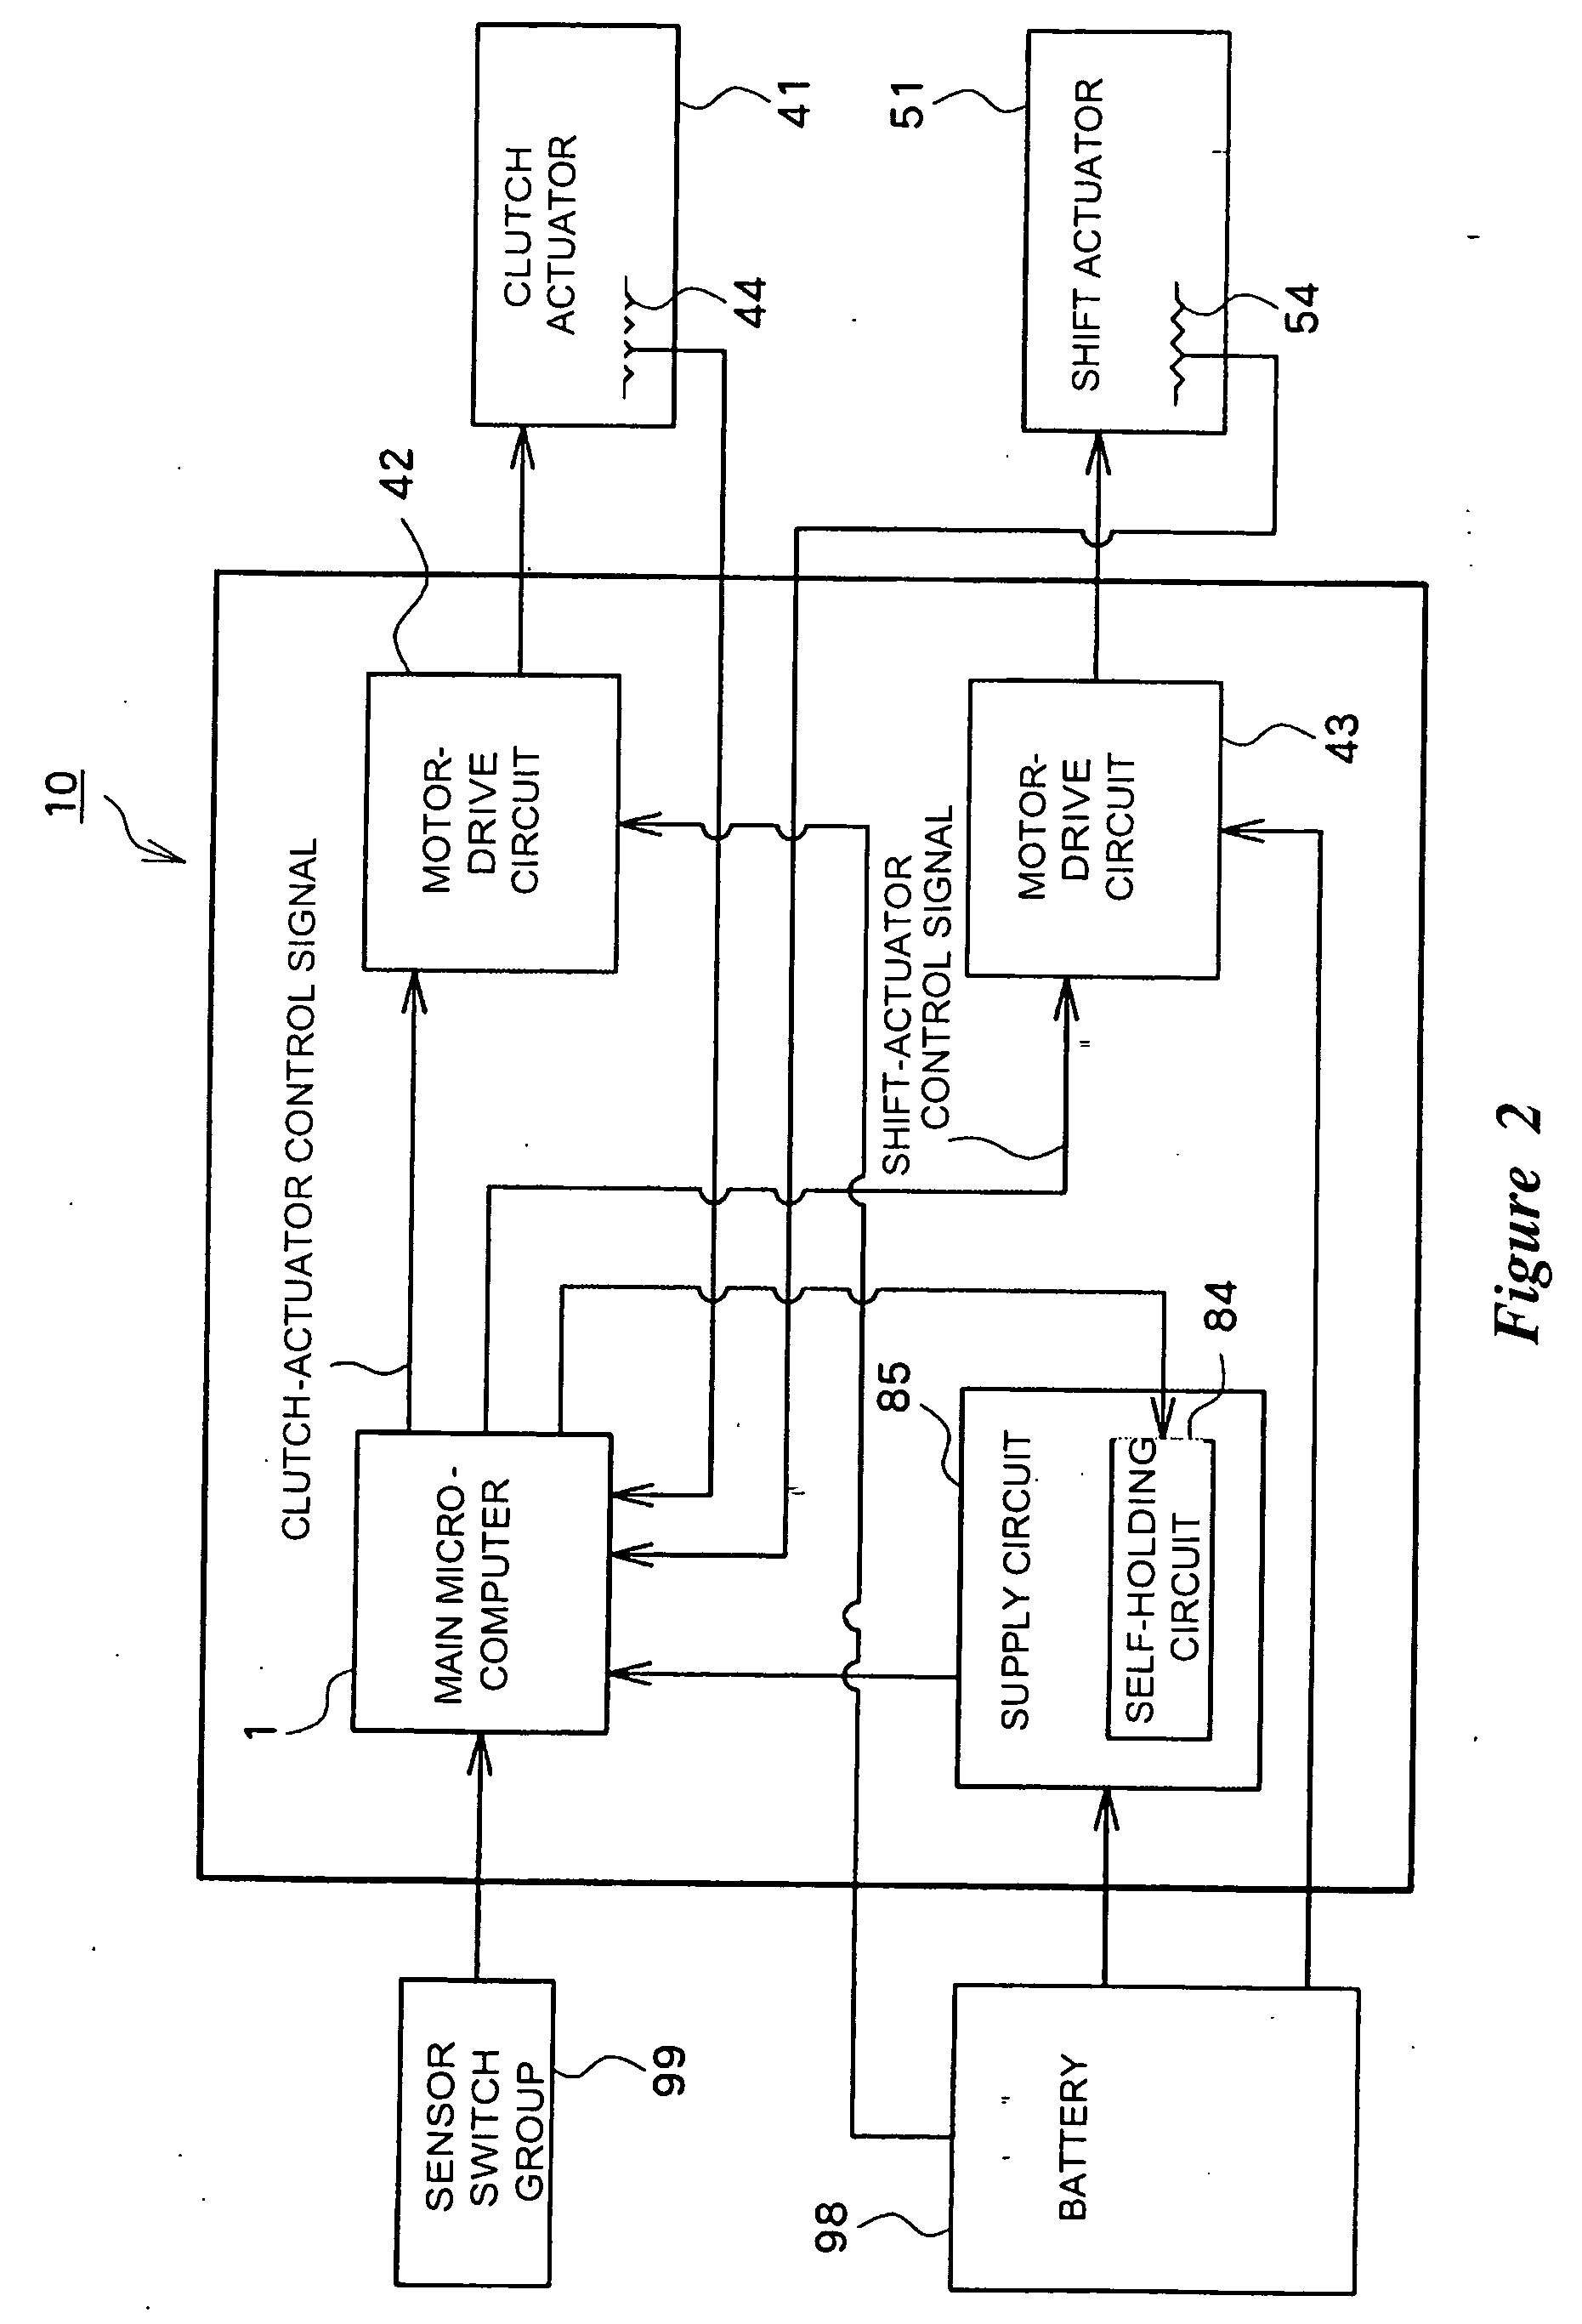 Apparatus and method for controlling transmission of straddle-type vehicle